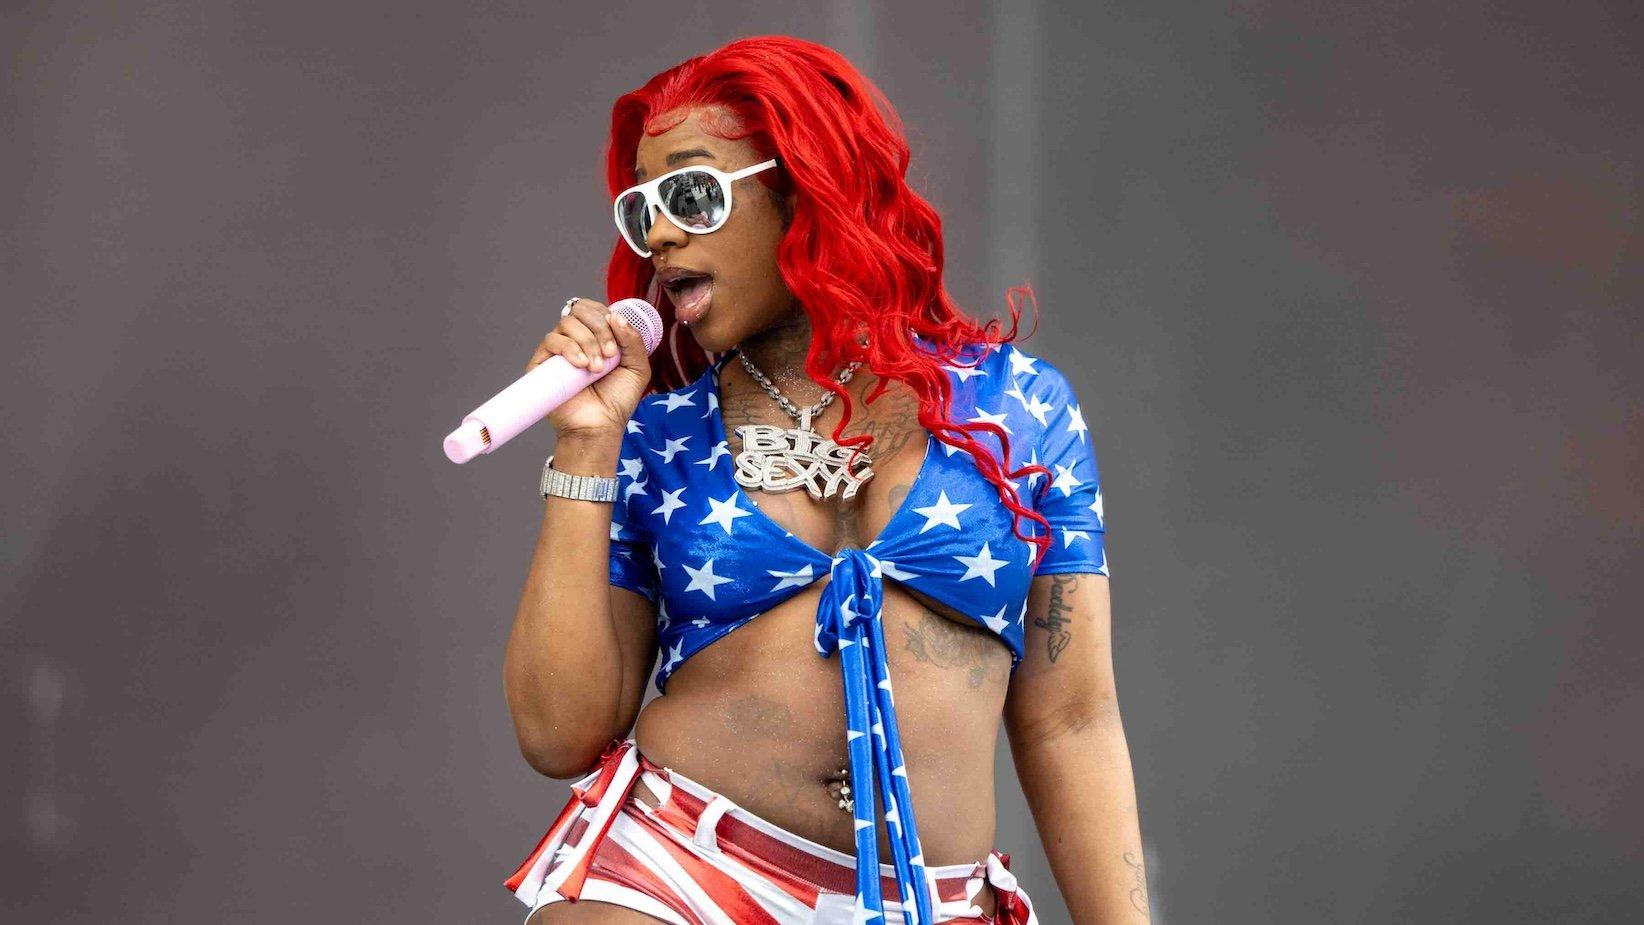 Photo of Sexyy Red performing onstage during at the 2024 Rolling Loud Festival in Los Angeles. She is wearing a blue bikini top with white stars, red and white shorts, white sunglasses, and bright red hair.